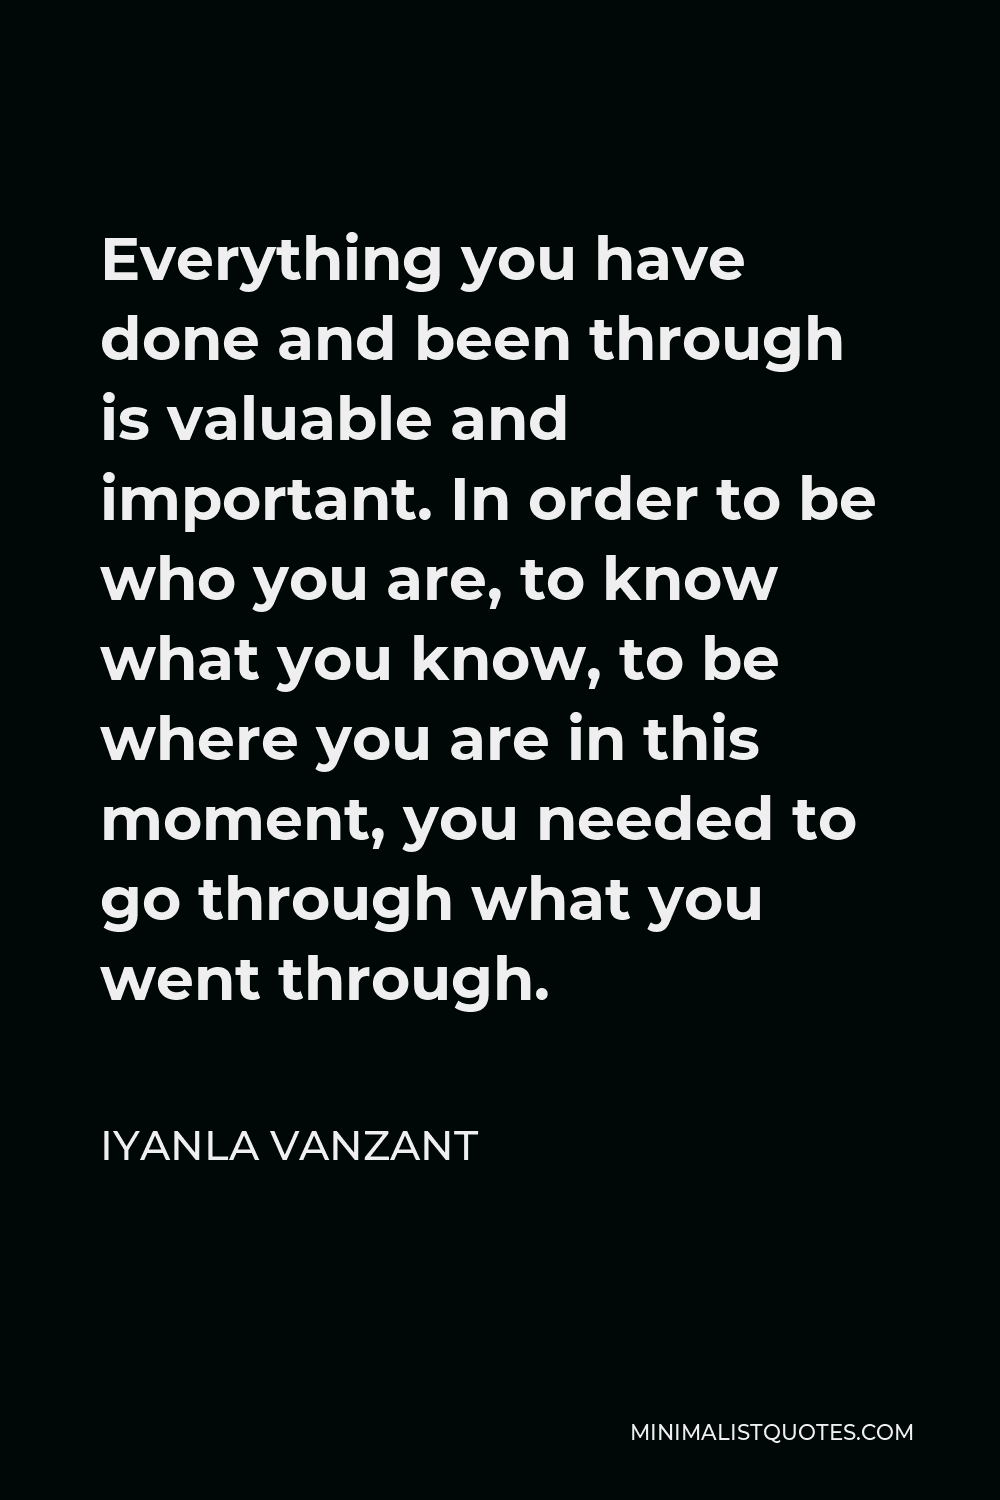 Iyanla Vanzant Quote - Everything you have done and been through is valuable and important. In order to be who you are, to know what you know, to be where you are in this moment, you needed to go through what you went through.